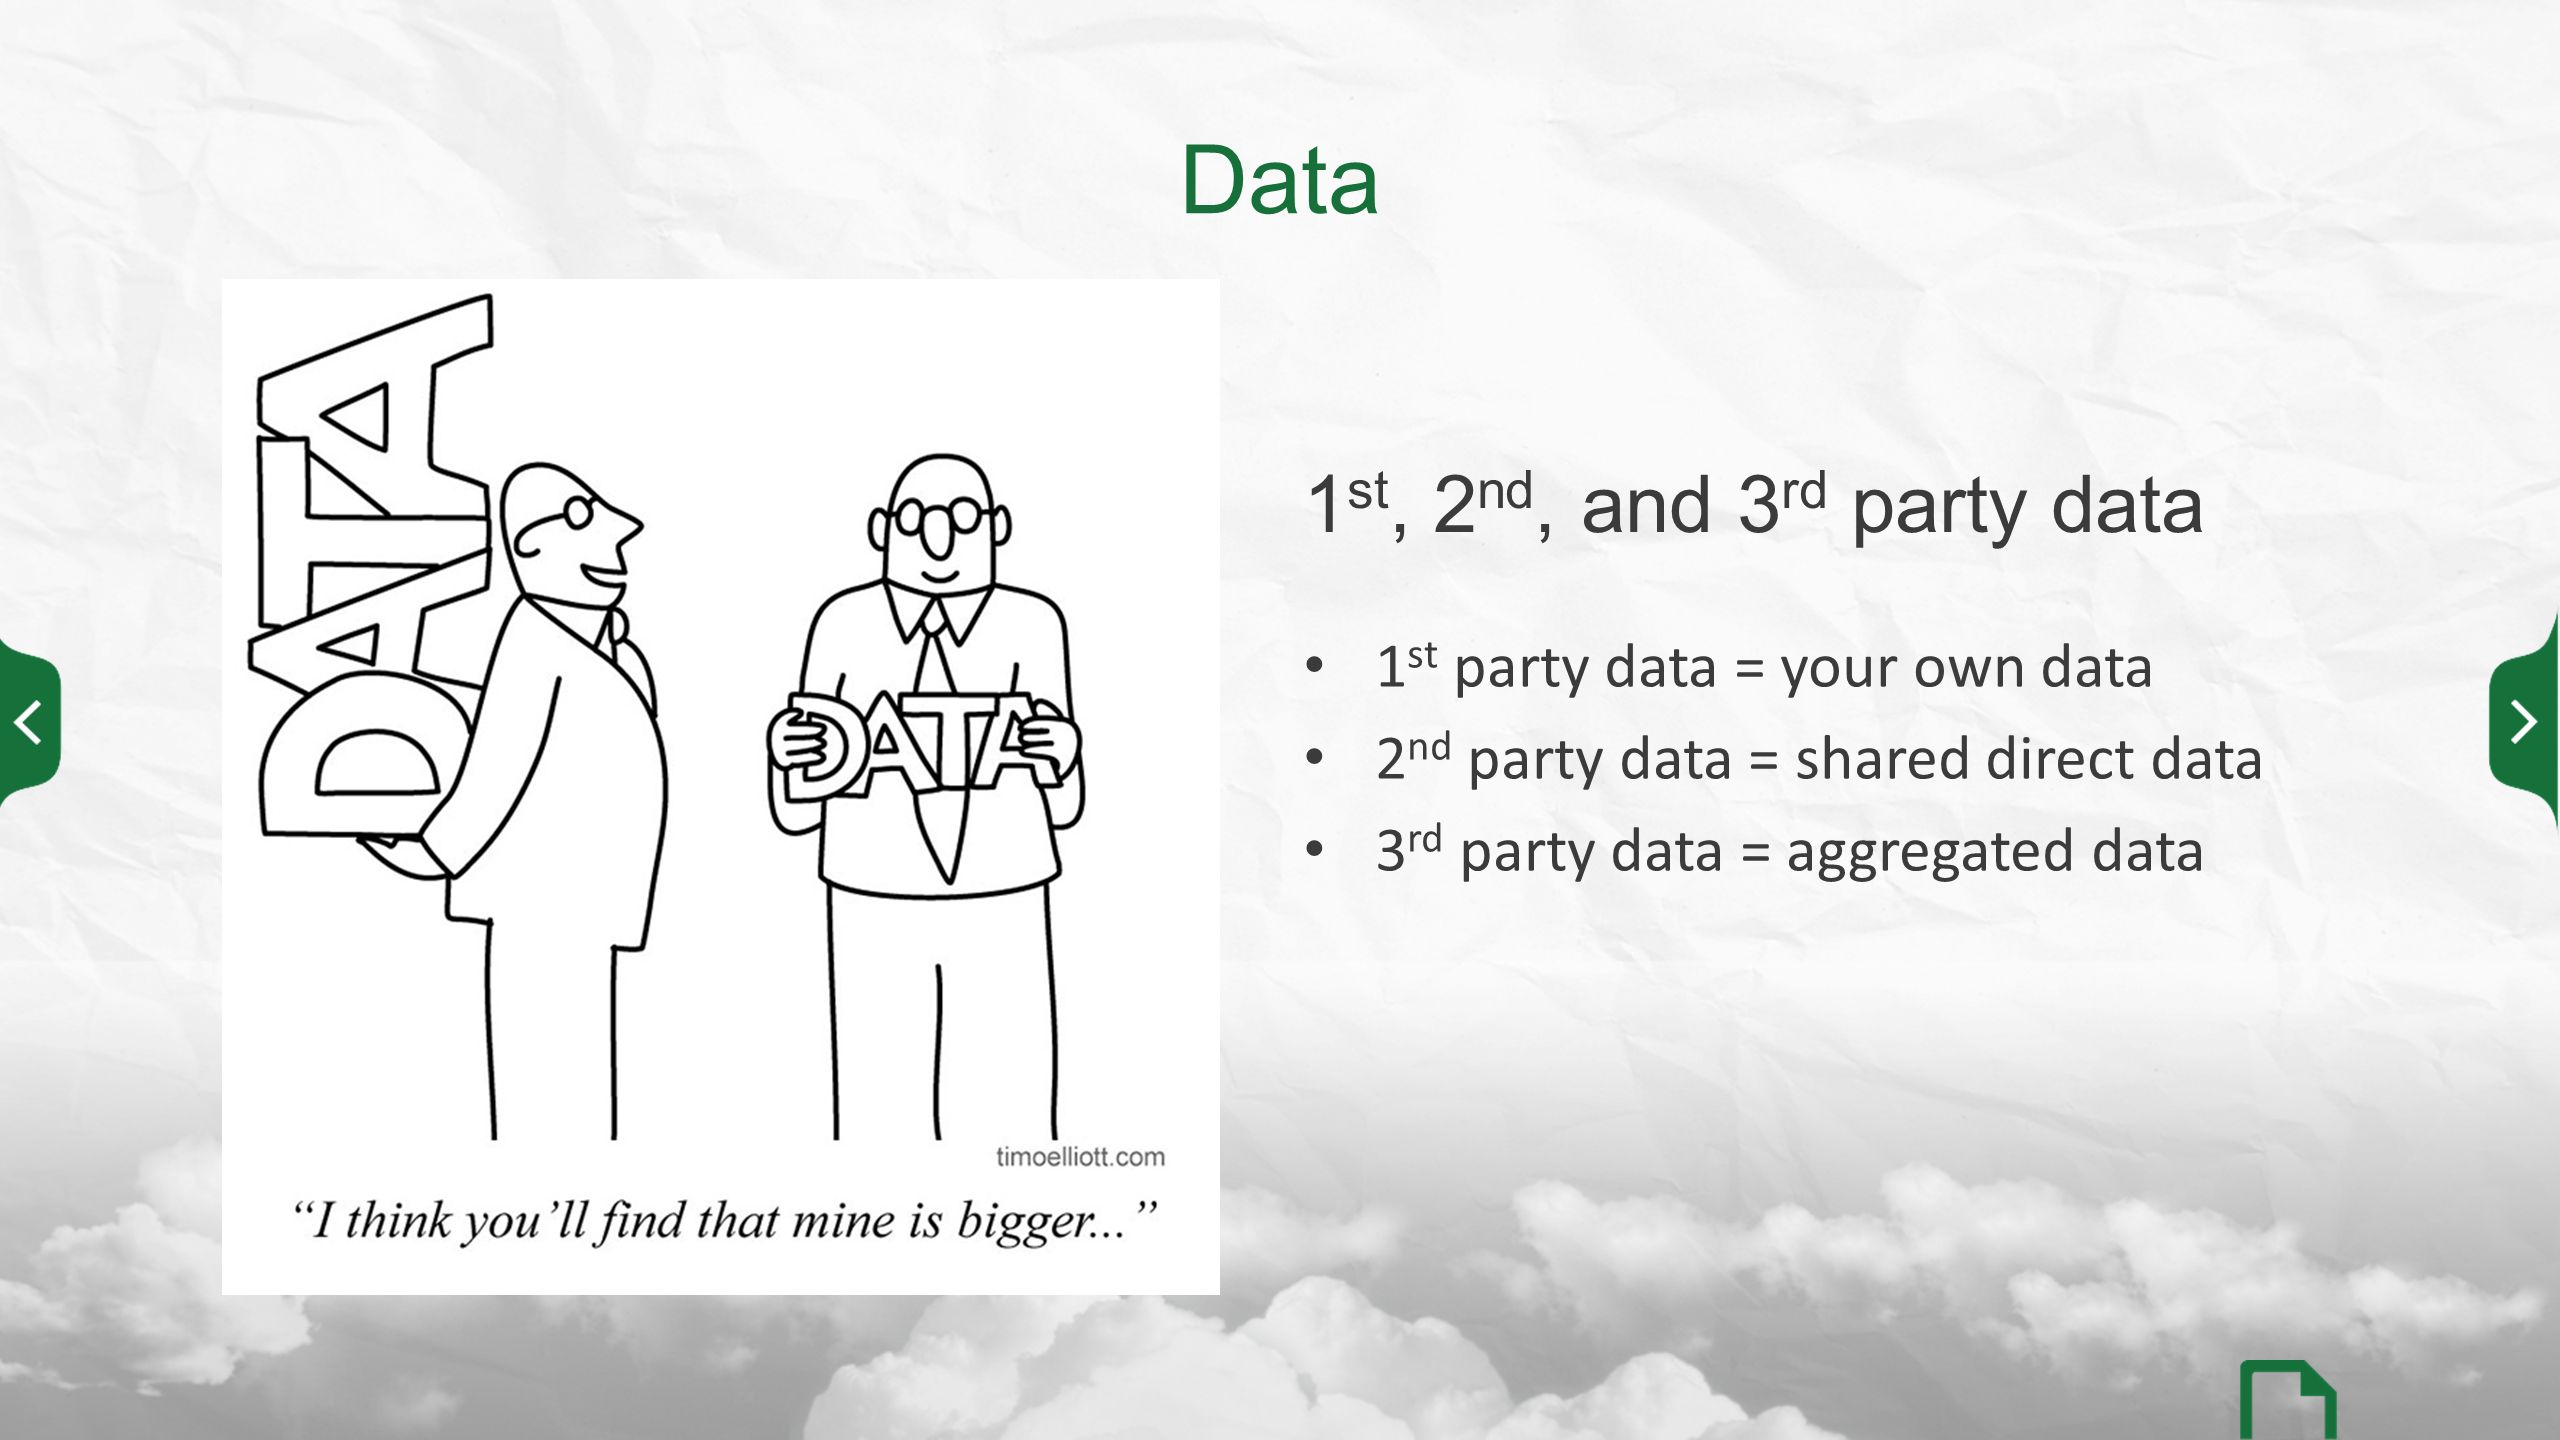 1 st party data = your own data 2 nd party data = shared direct data 3 rd party data = aggregated data Data 1 st, 2 nd, and 3 rd party data